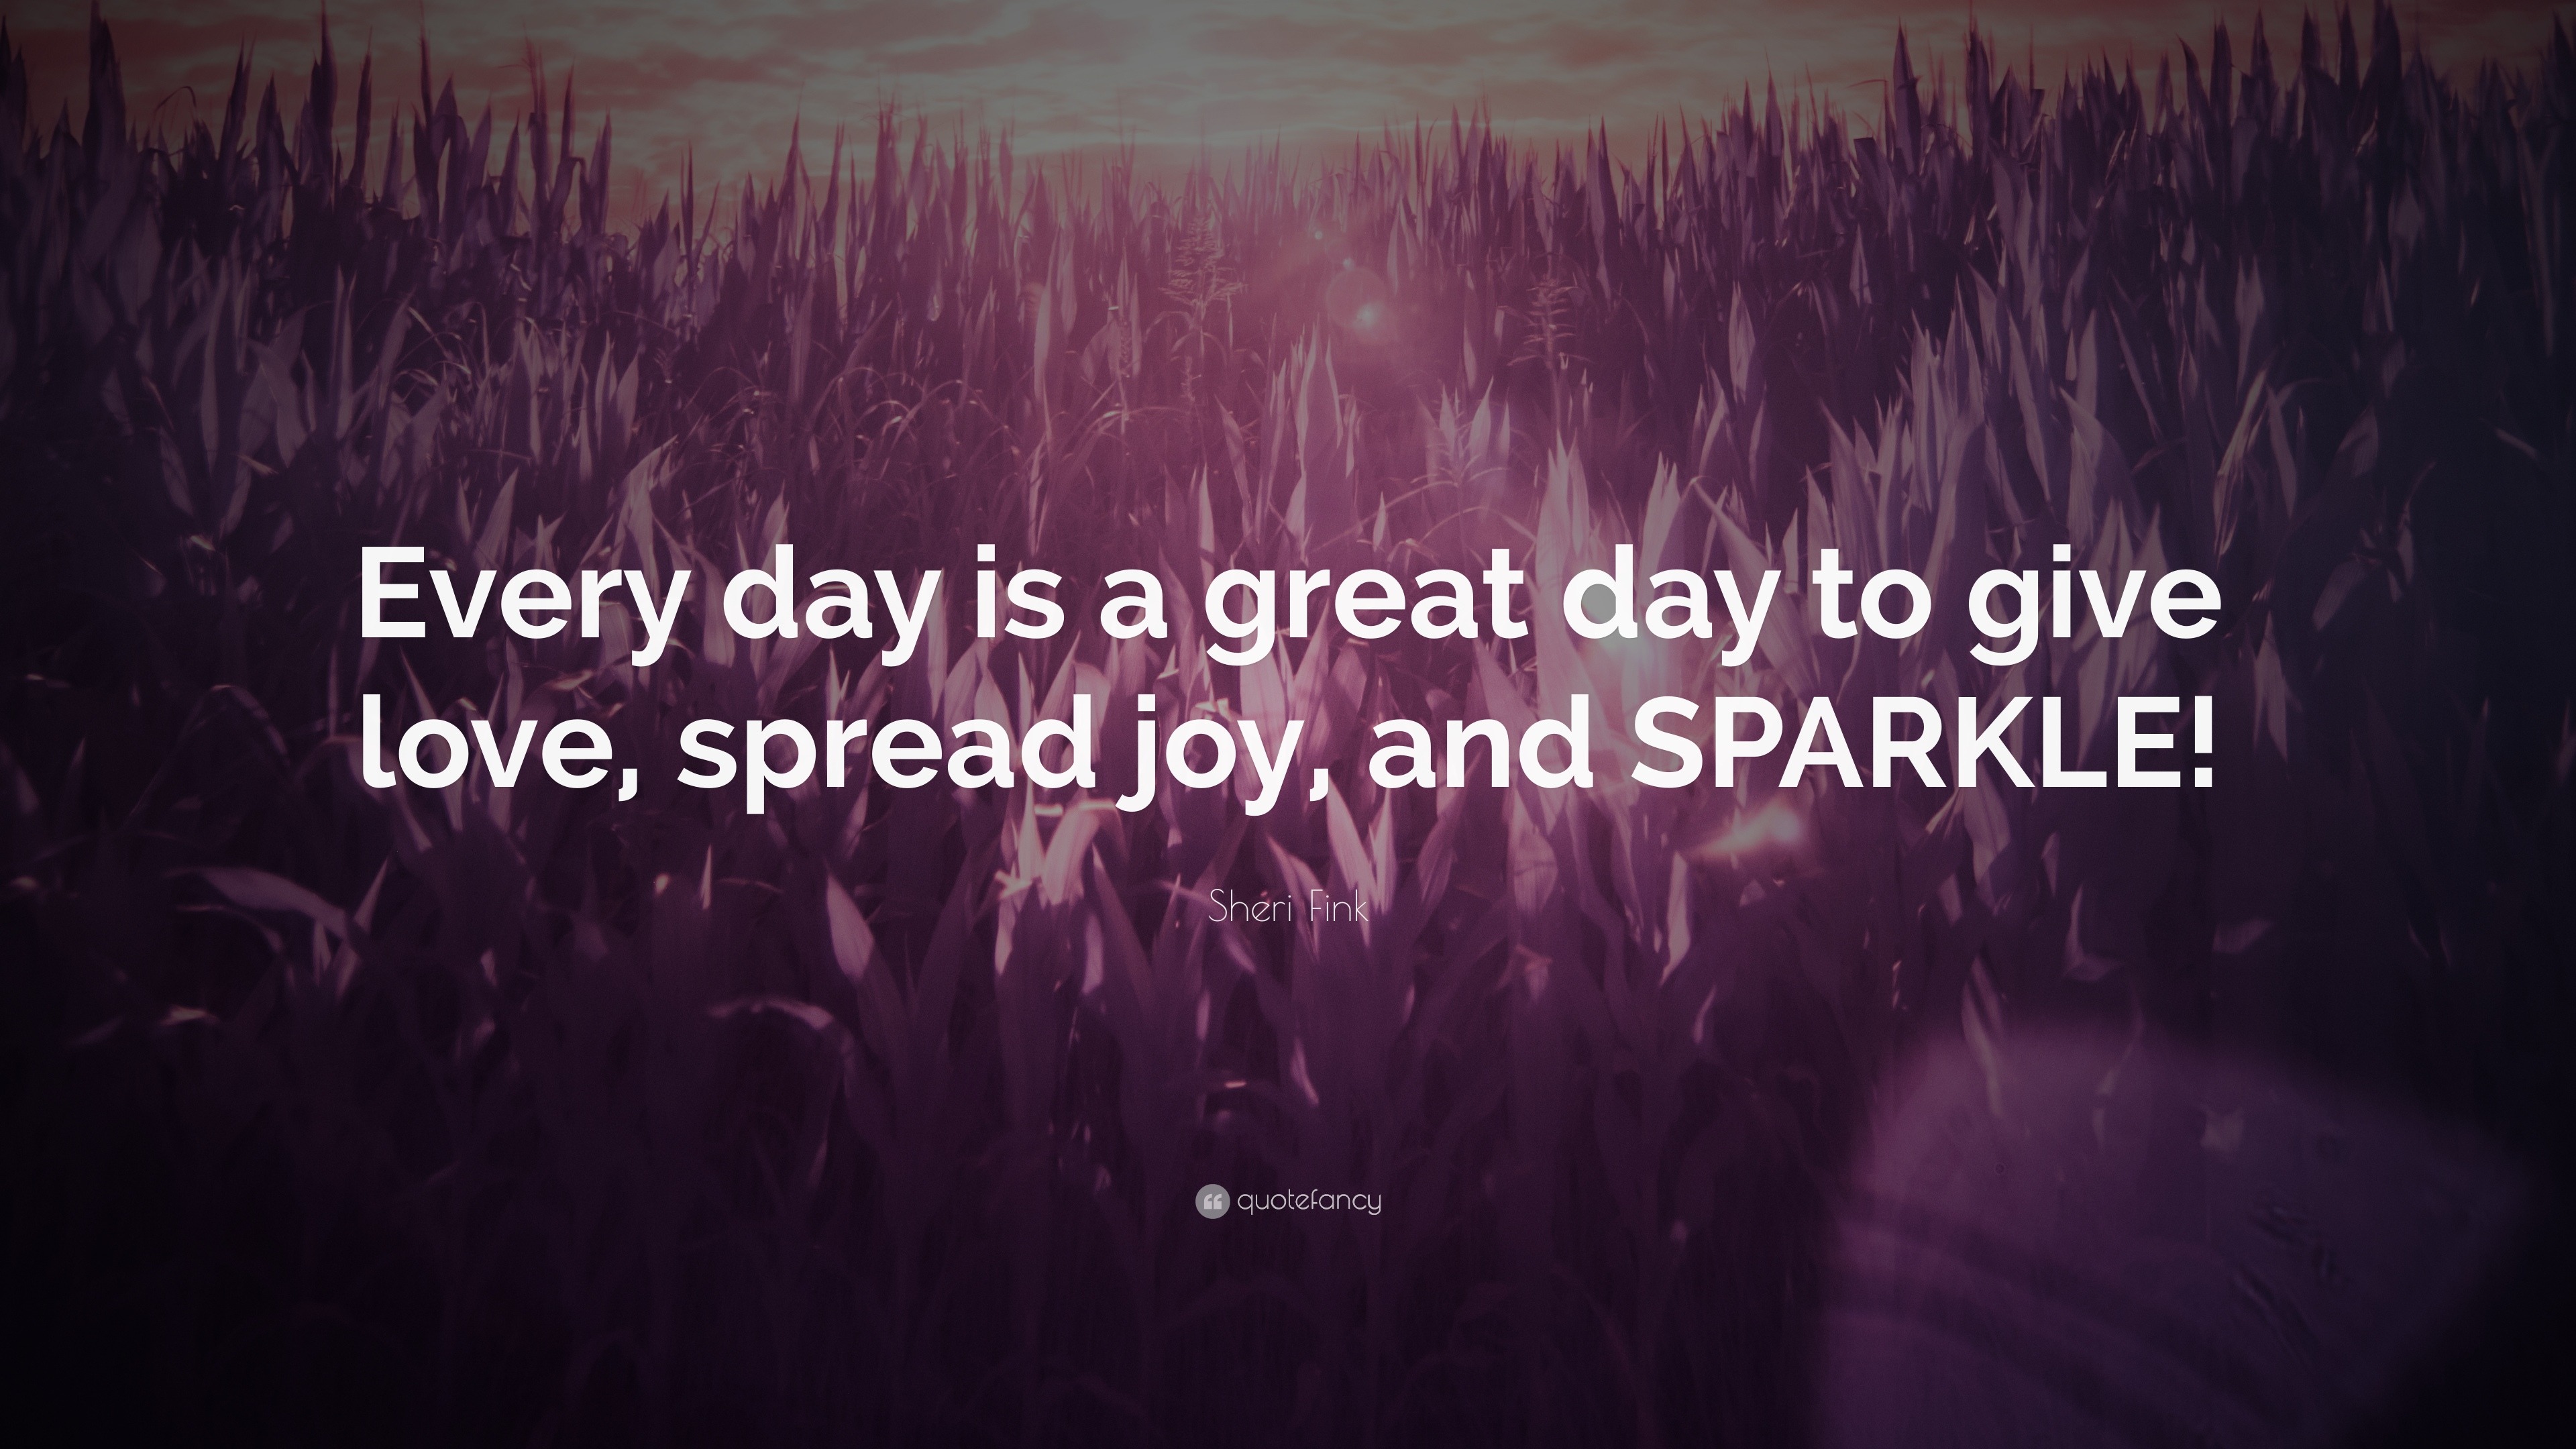 Every day is a great day to give love, spread joy, and SPARKLE! 